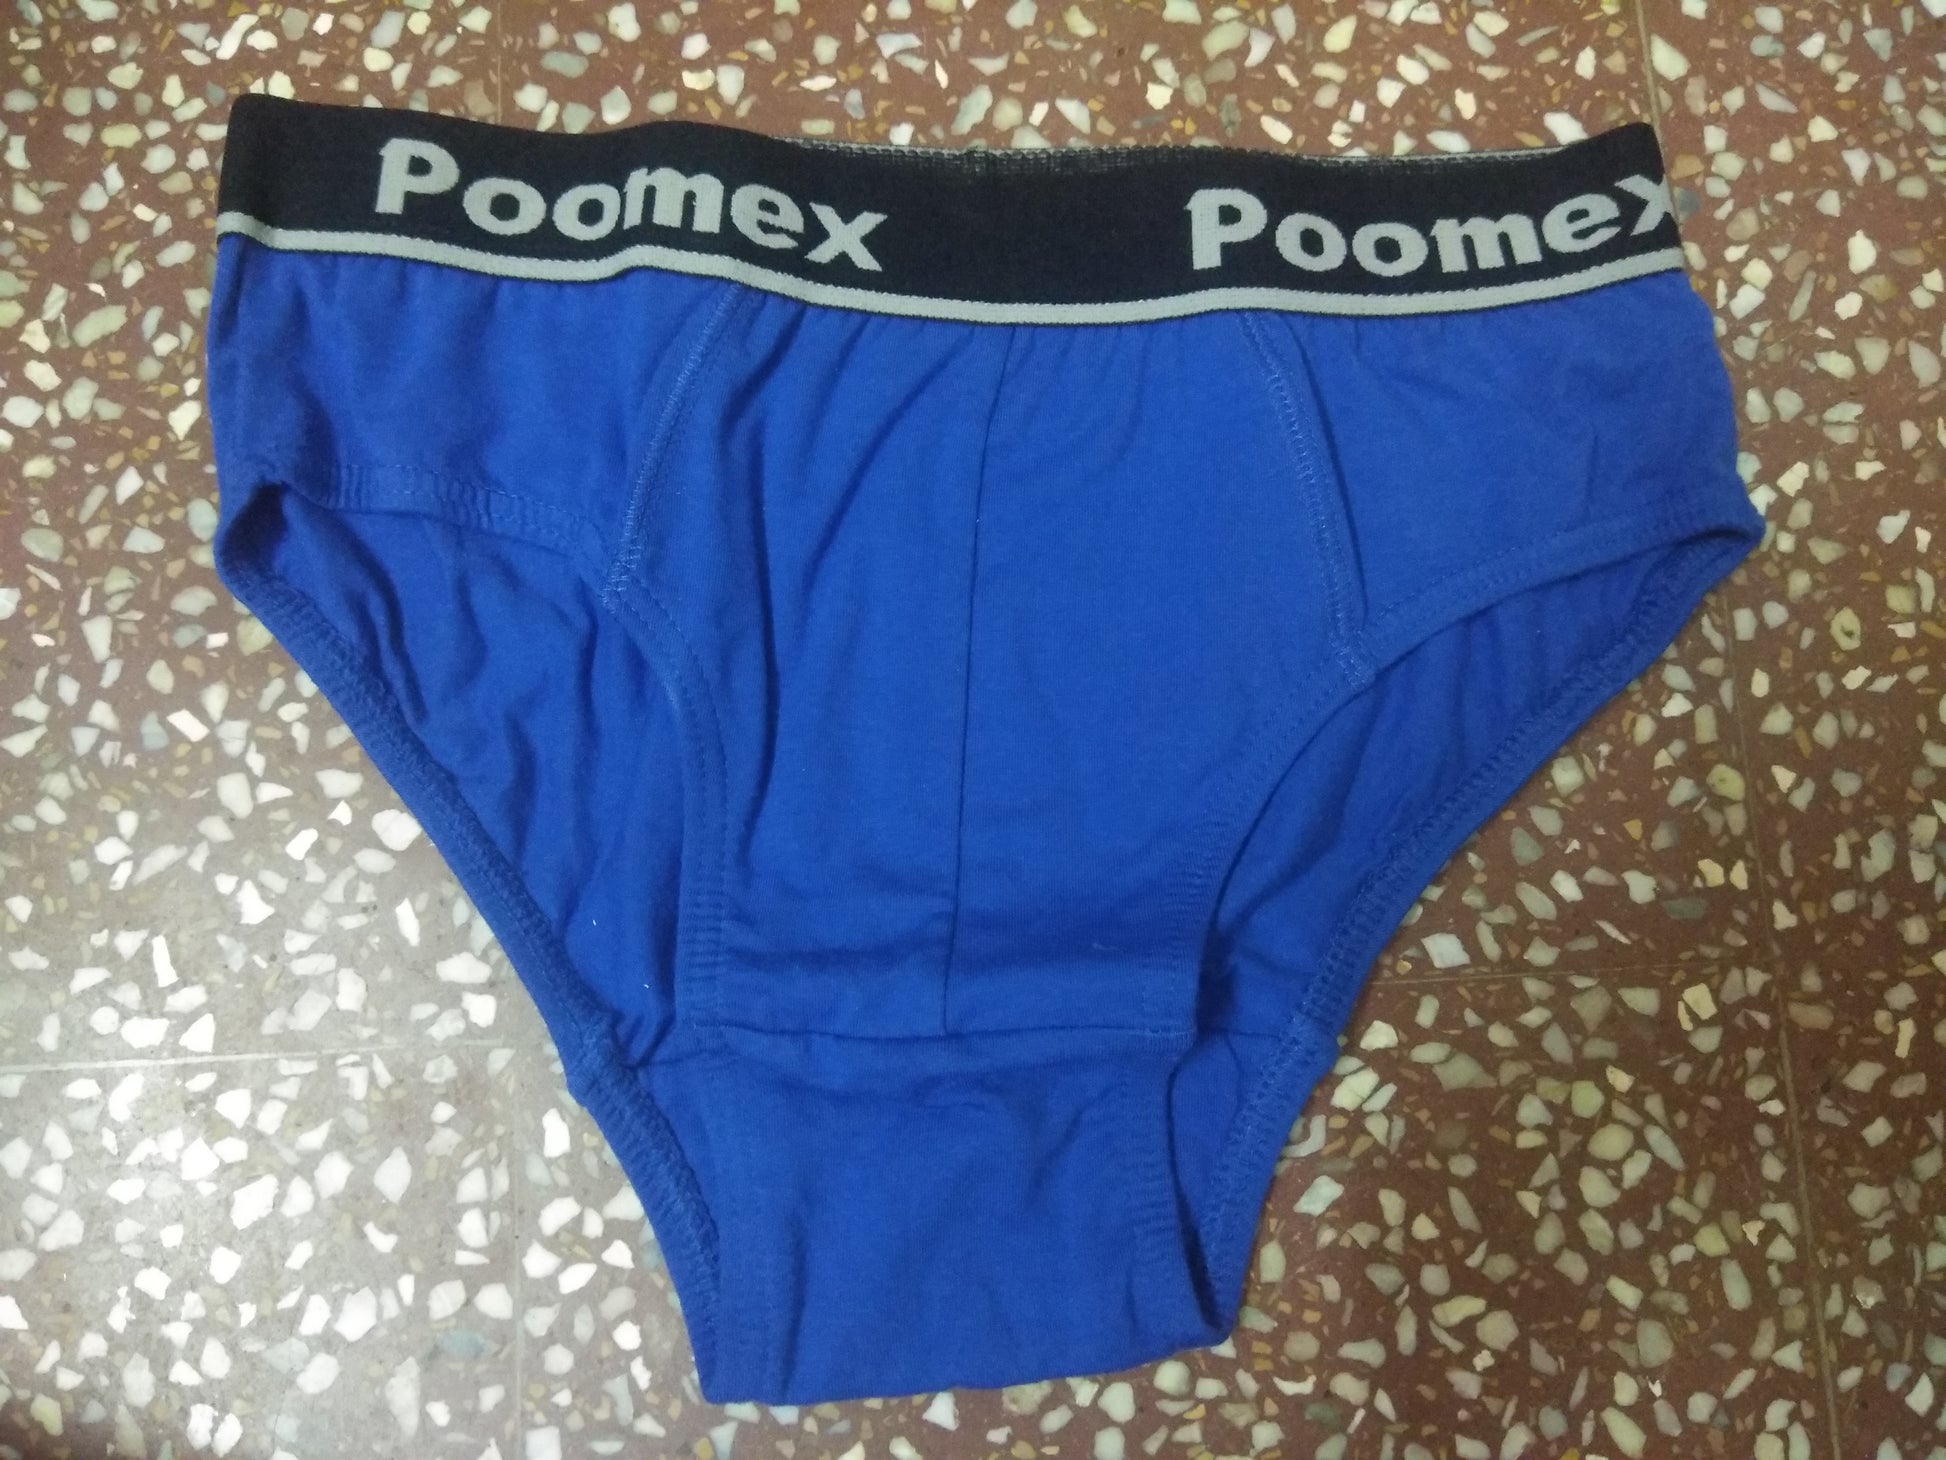 Poomex Gents Comfort P Trunks with Pocket - 100% Combed Cotton